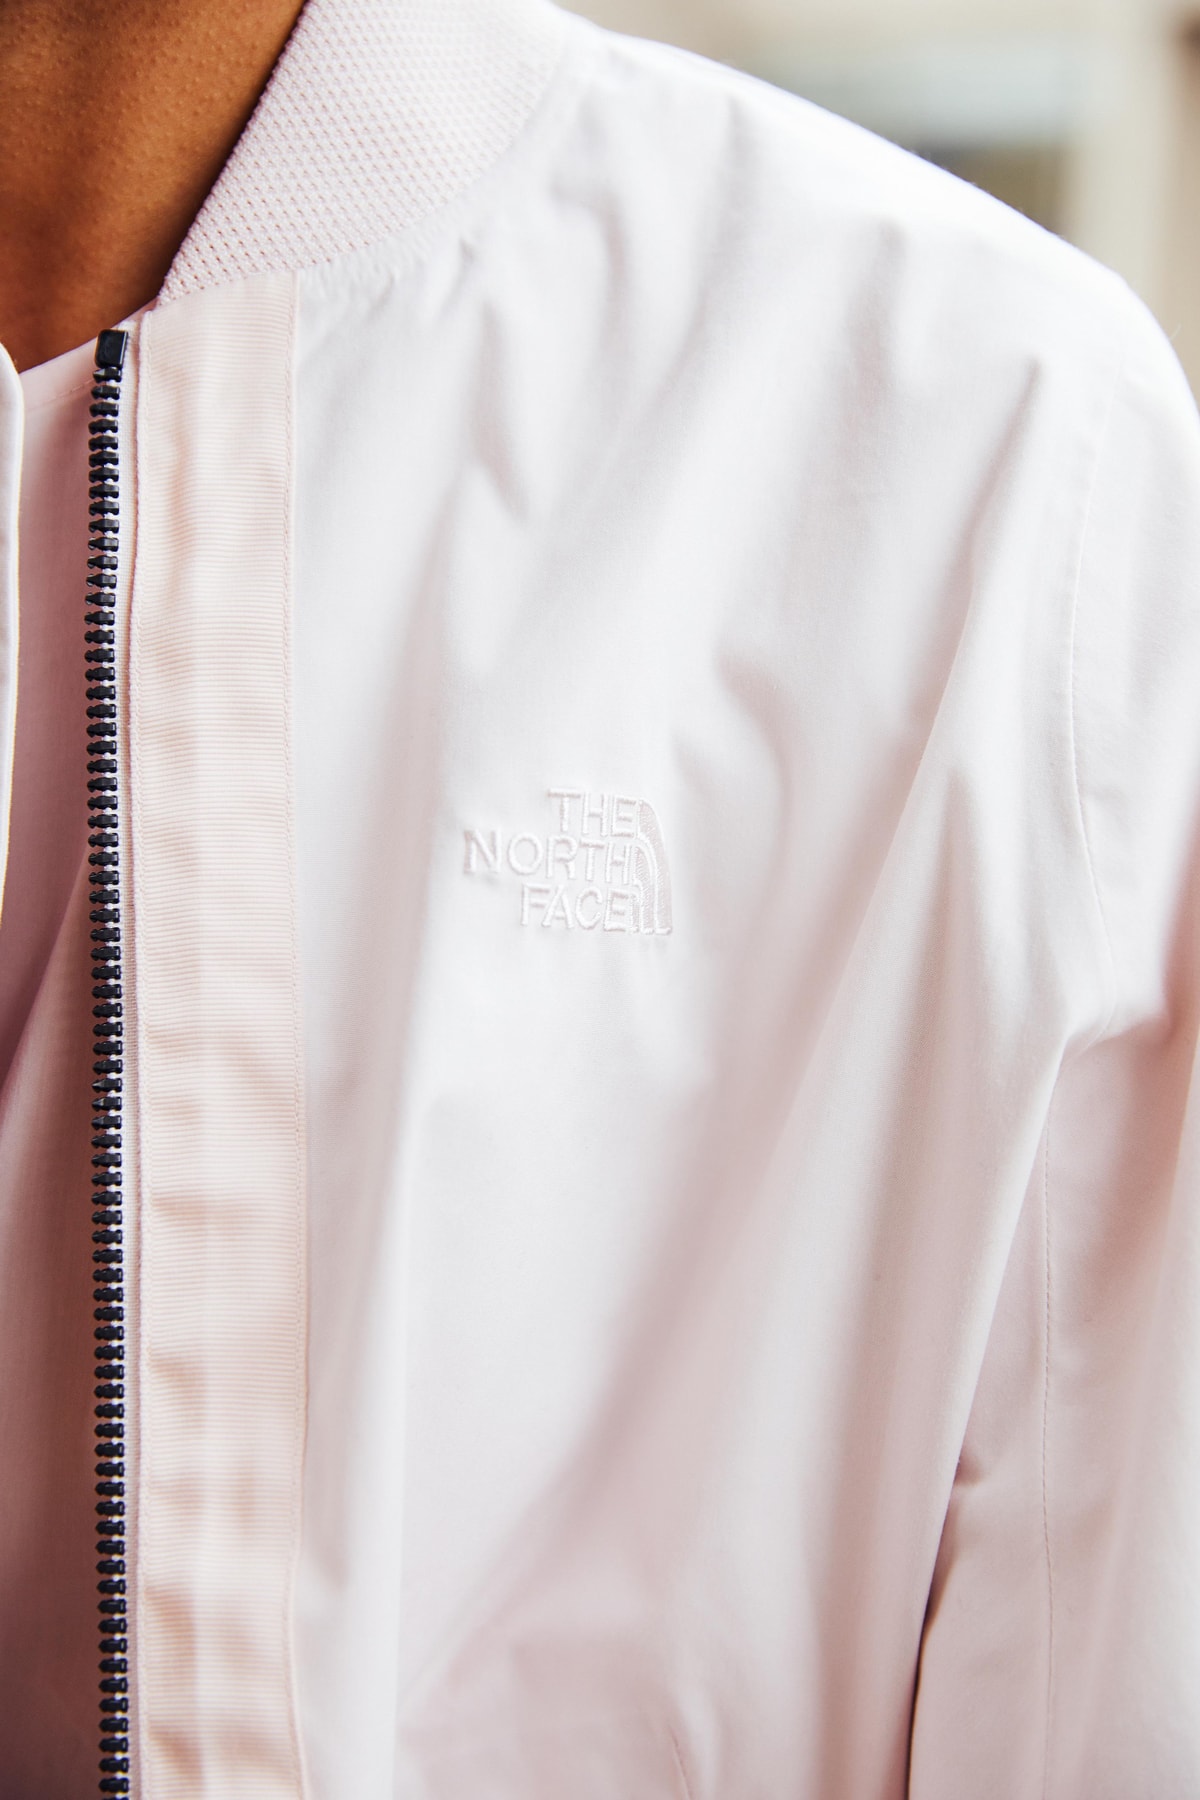 The North Face Urban Exploration Black Series Spring/Summer 2018 Collection Lookbook Jacket Pink